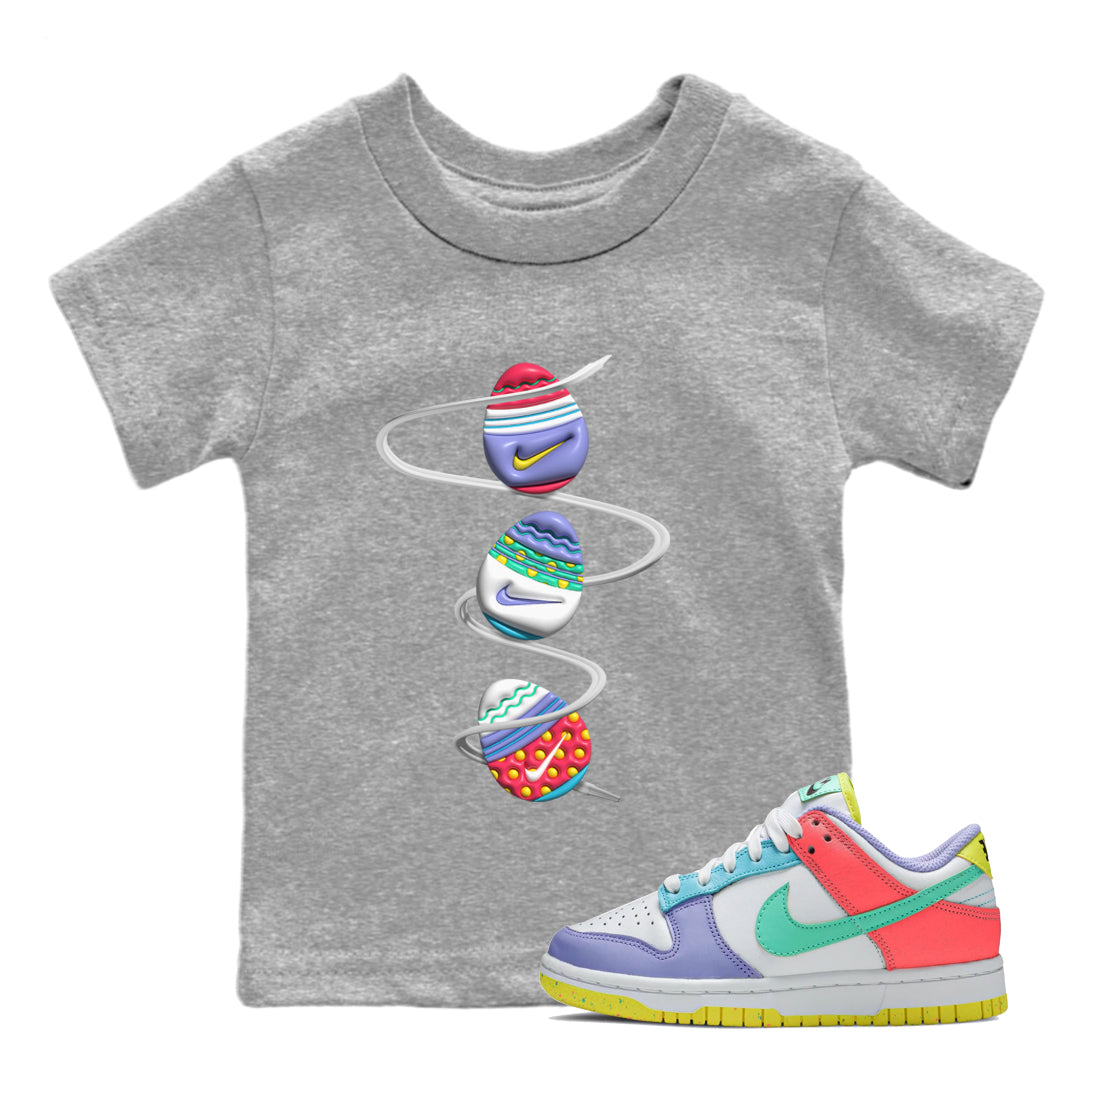 Dunk Easter Candy Sneaker Tees Drip Gear Zone 3D Easter Eggs Sneaker Tees Nike Easter Shirt Kids Shirts Heather Grey 1